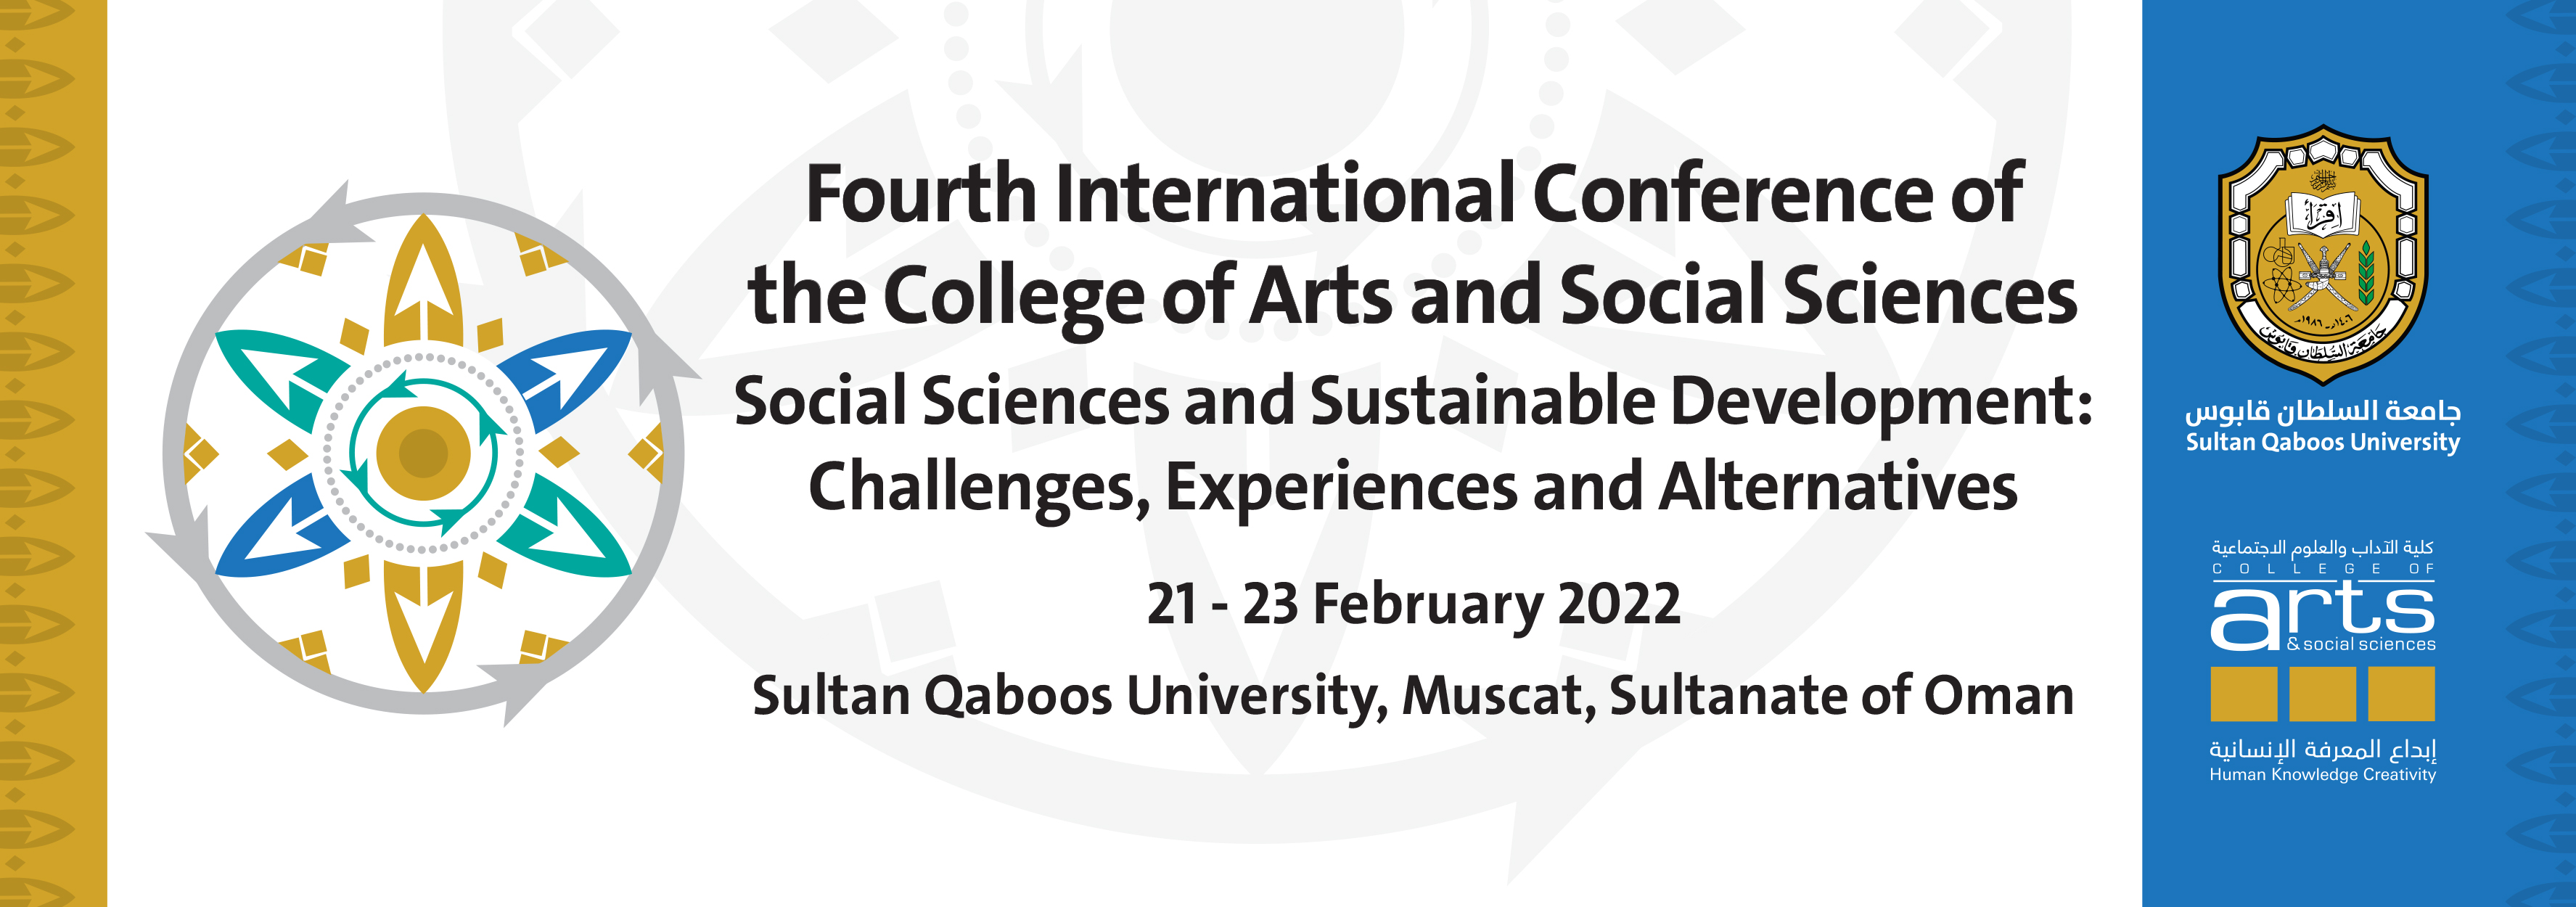 Fourth International Conference of the College of Arts and Social Sciences and Sustainable Development : Challenges, Experiences and Alternatives